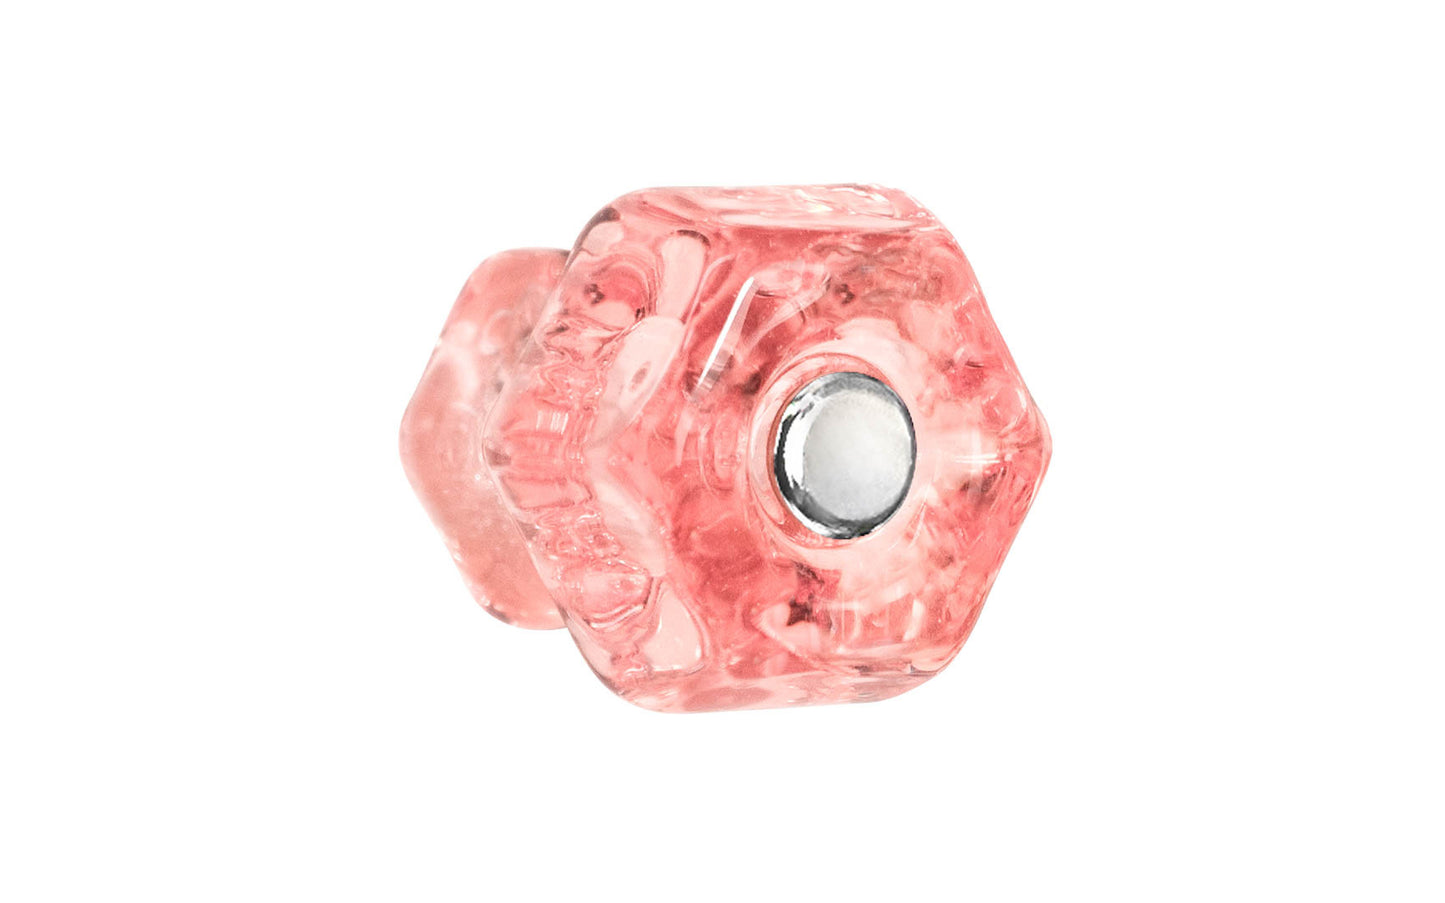 Vintage-style Hardware · Classic & original-style hexagonal glass cabinet knob with a silver pan head thru-bolt. Made of genuine glass. Depression Pink Rose color glass. Includes a silver pan thru-bolt. Reproduction hexagonal classic glass knob. Traditional hex glass knob. 1-1/4" Diameter